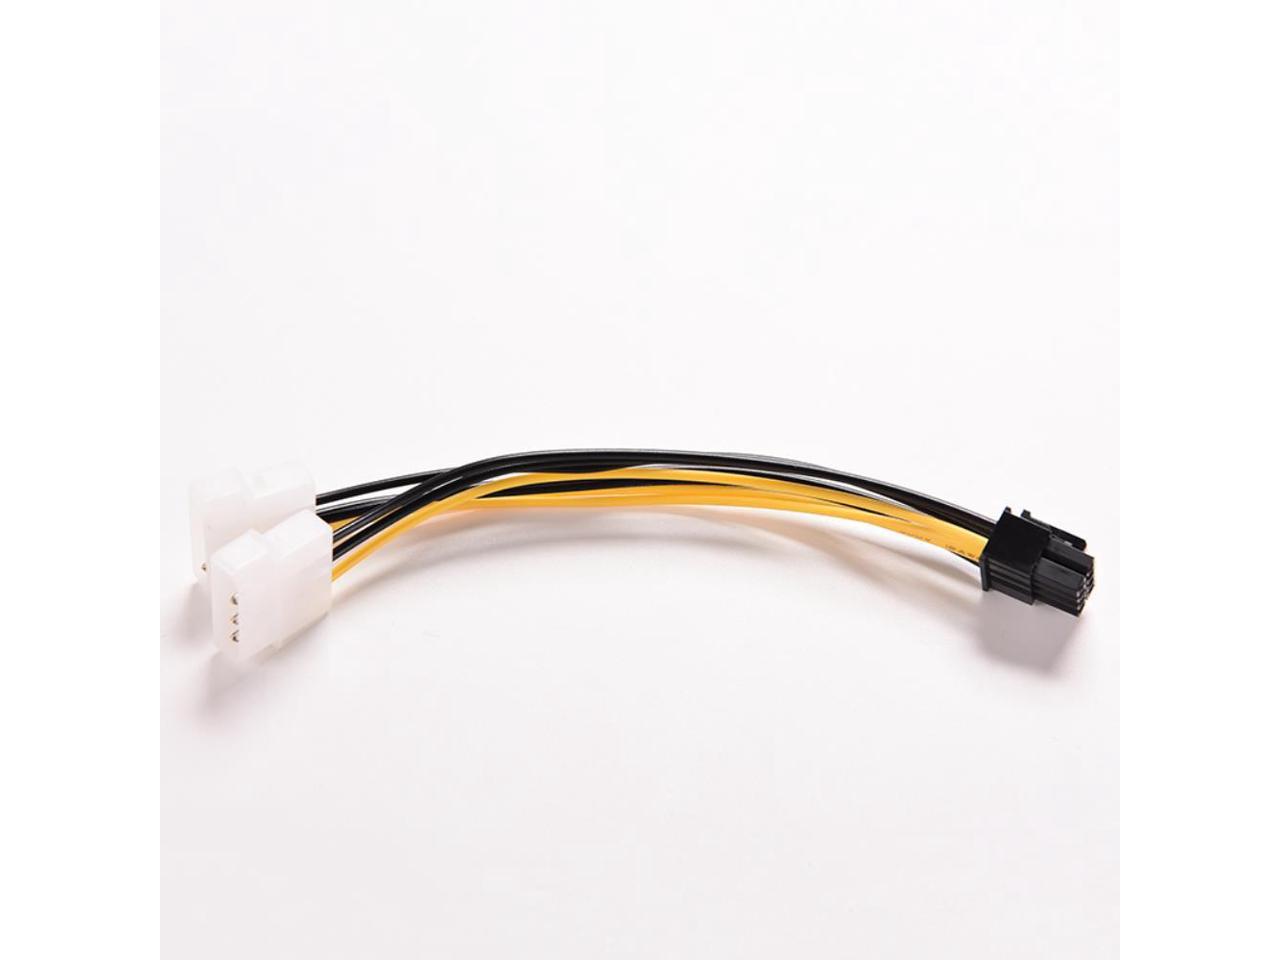 16cm 8 Pin PCI Express Male To Dual LP4 4Pin Molex IDE Power Cable Adapter NICA 